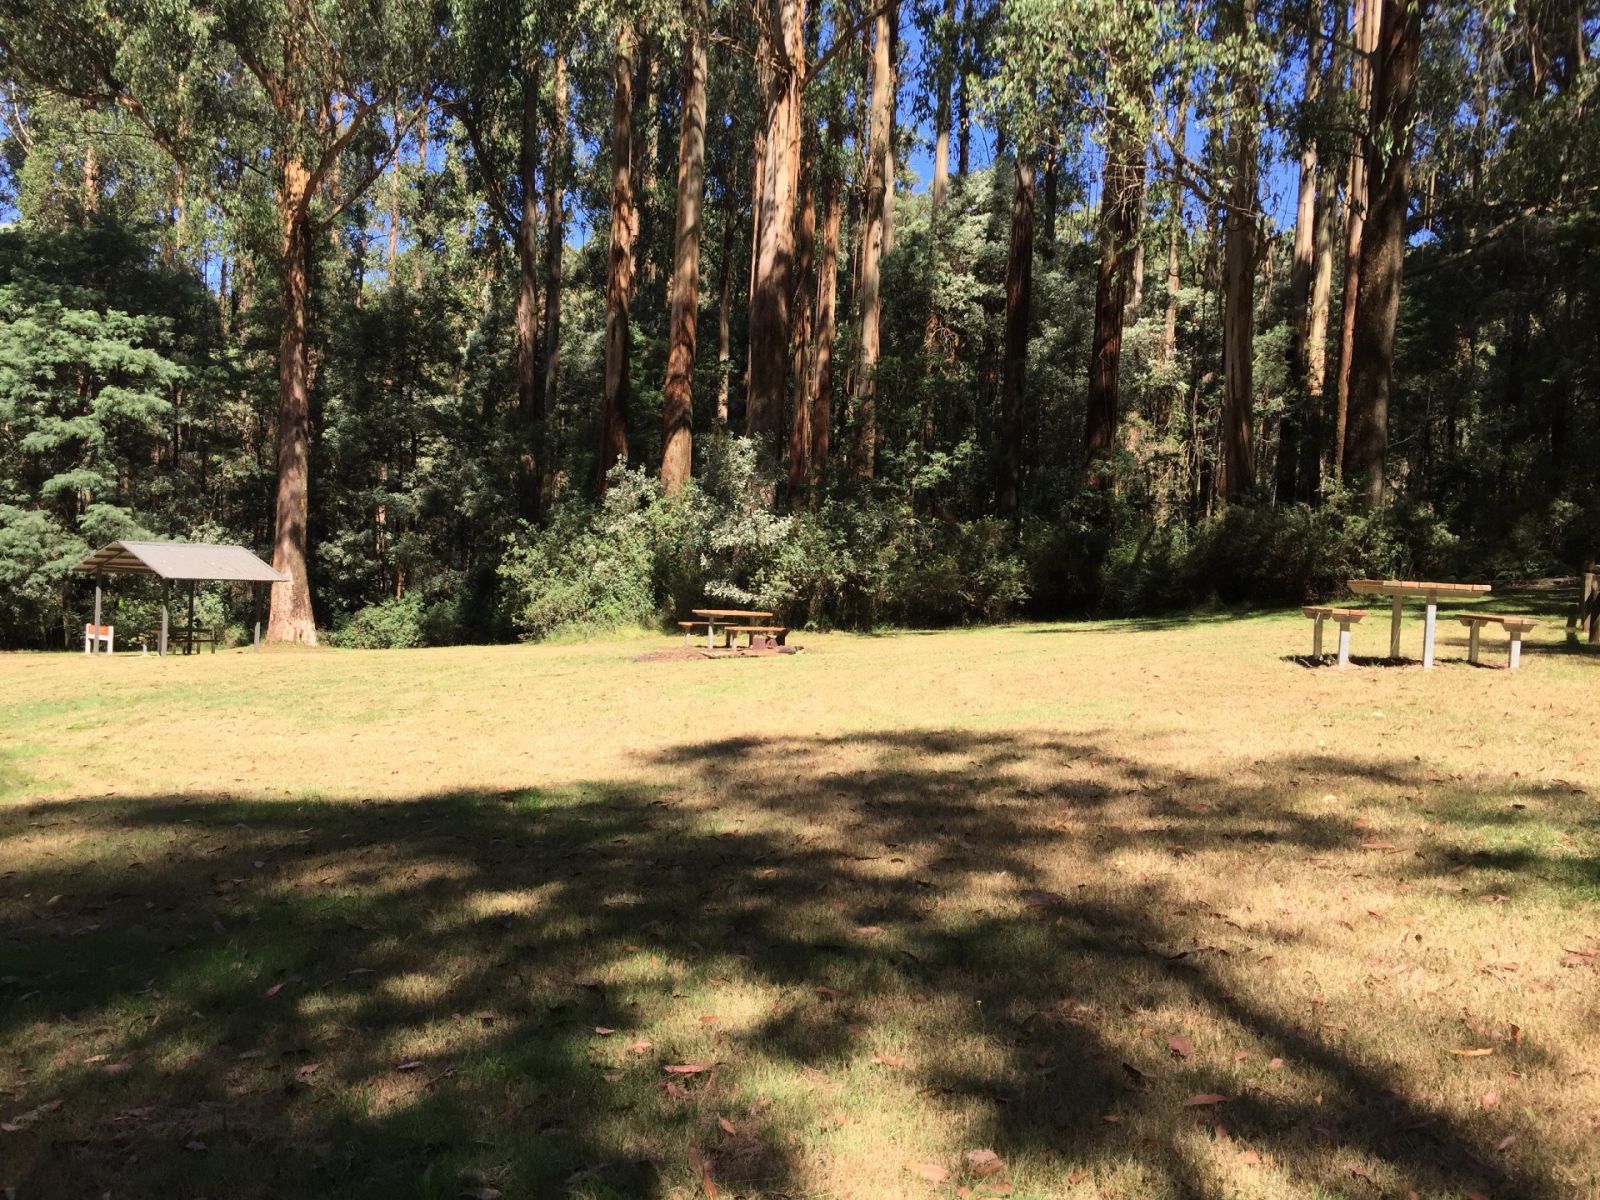 A large and sunny grassy picnic area surrounded by tall trees